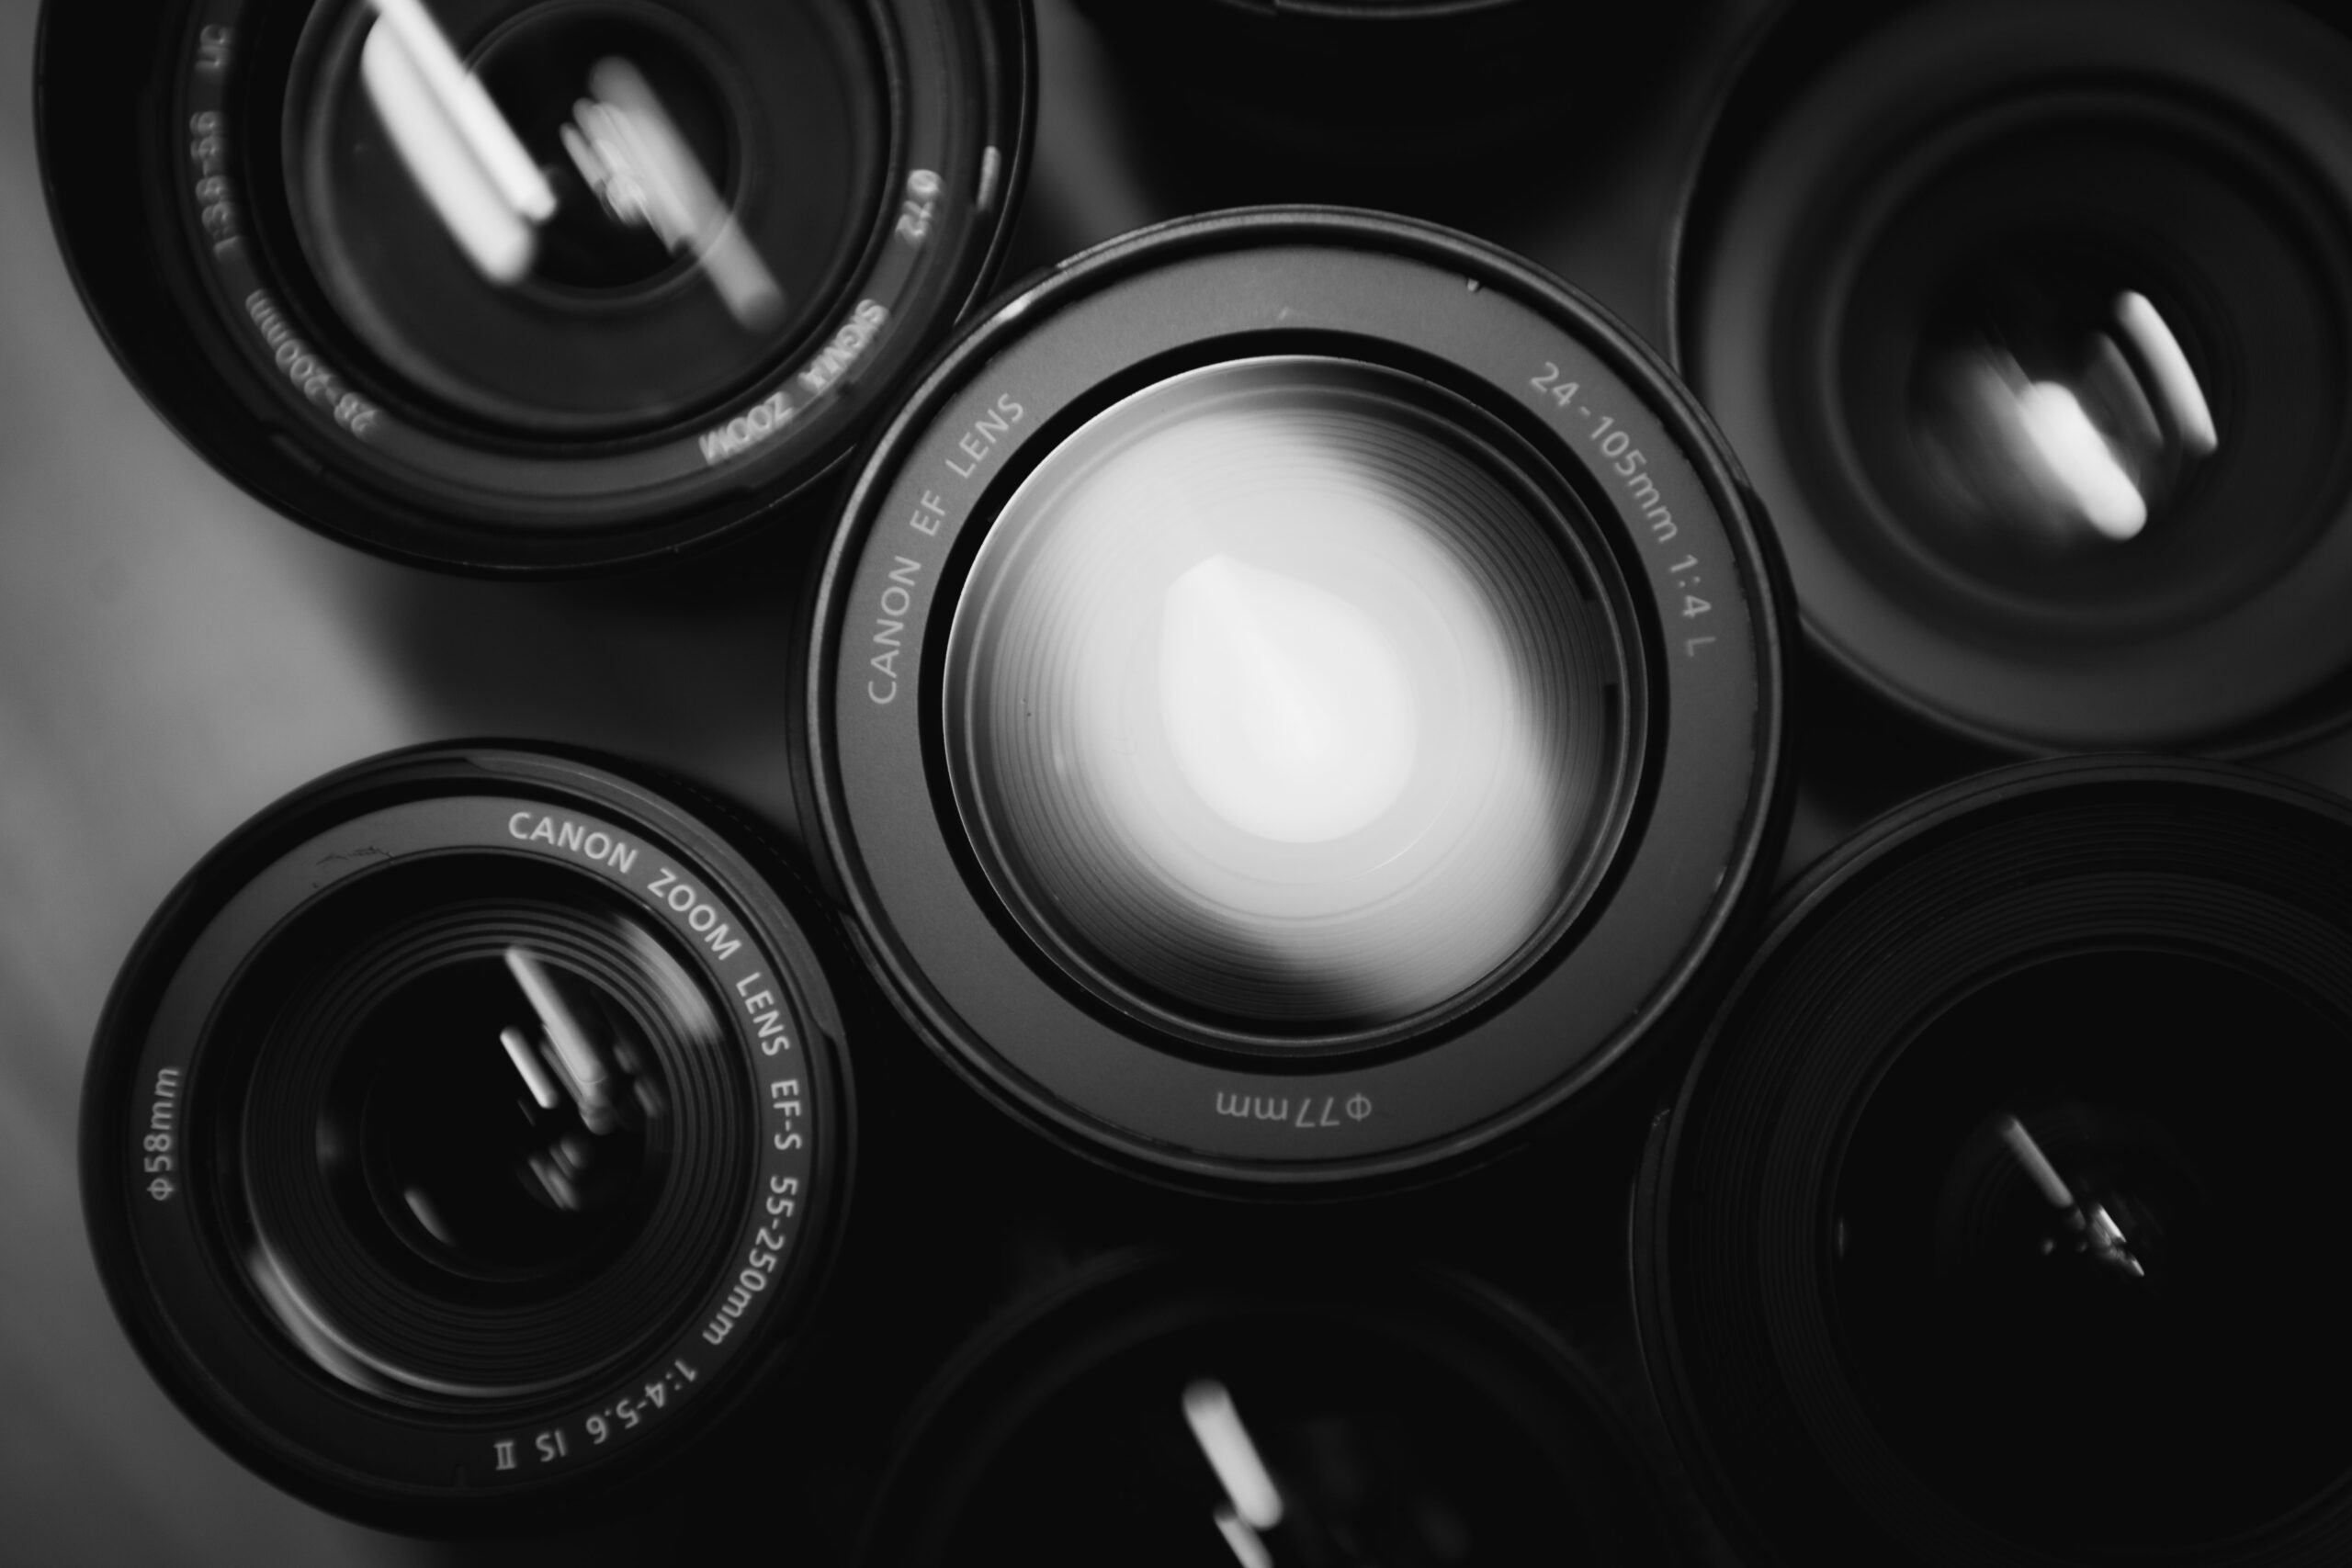 Why are Camera Lenses so Expensive?